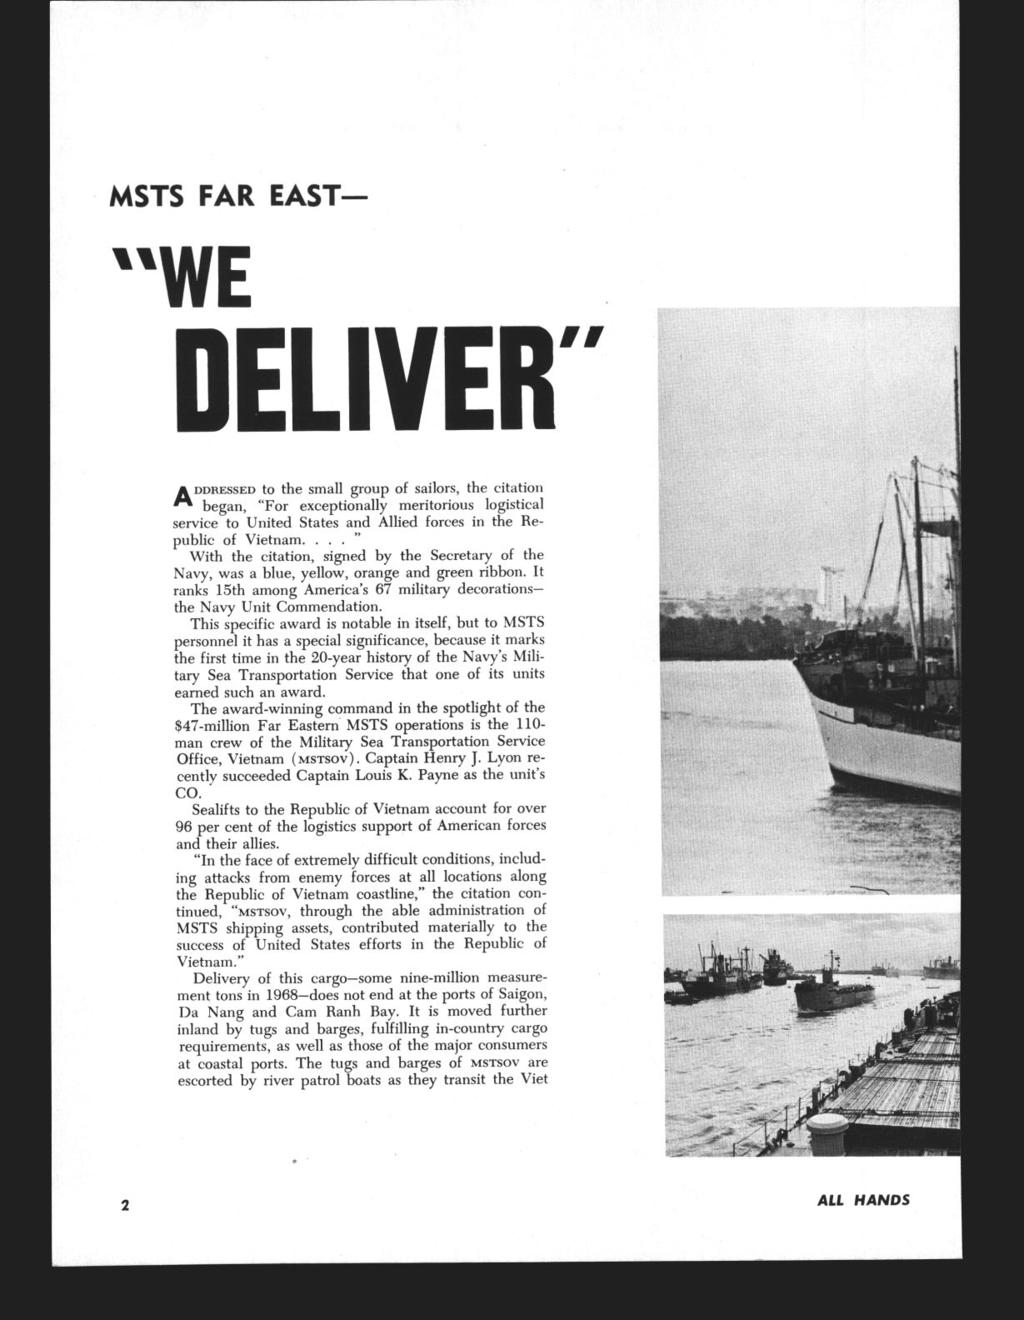 MSTS FAR EAST- WE DELIVER ADDRESSED to the small group of sailors, the citation began, For exceptionally meritorious logistical service to United States and Allied forces in the Re- public of Vietnam.